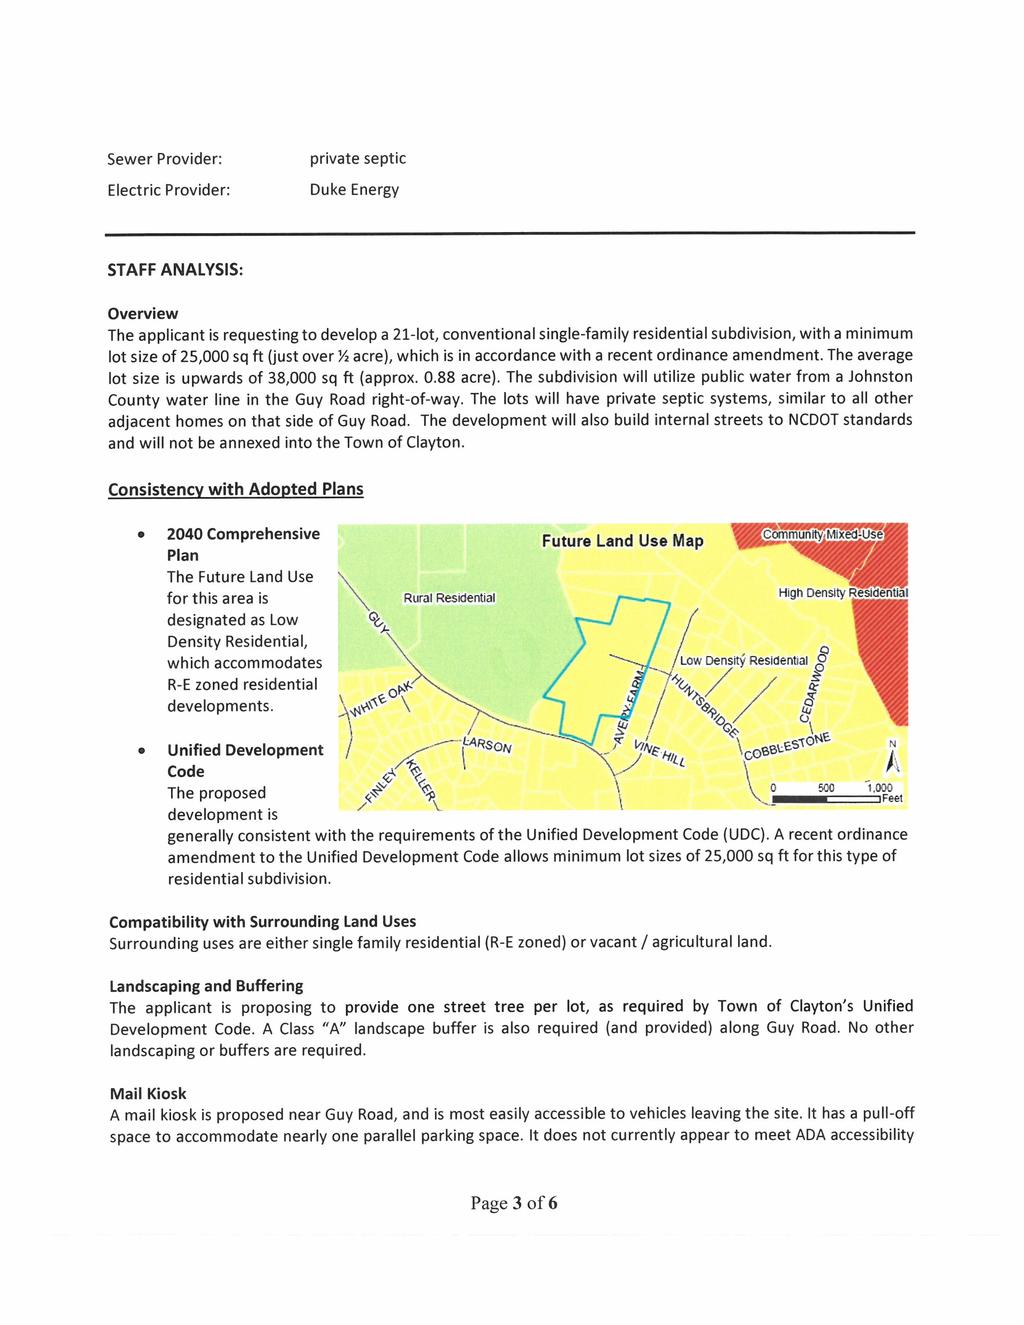 Sewer Provider: Electric Provider: private septic Duke Energy STAFFANALYSIS: Overview The applicant is requesting to develop a 21-lot, conventional single-family residential subdivision, with a